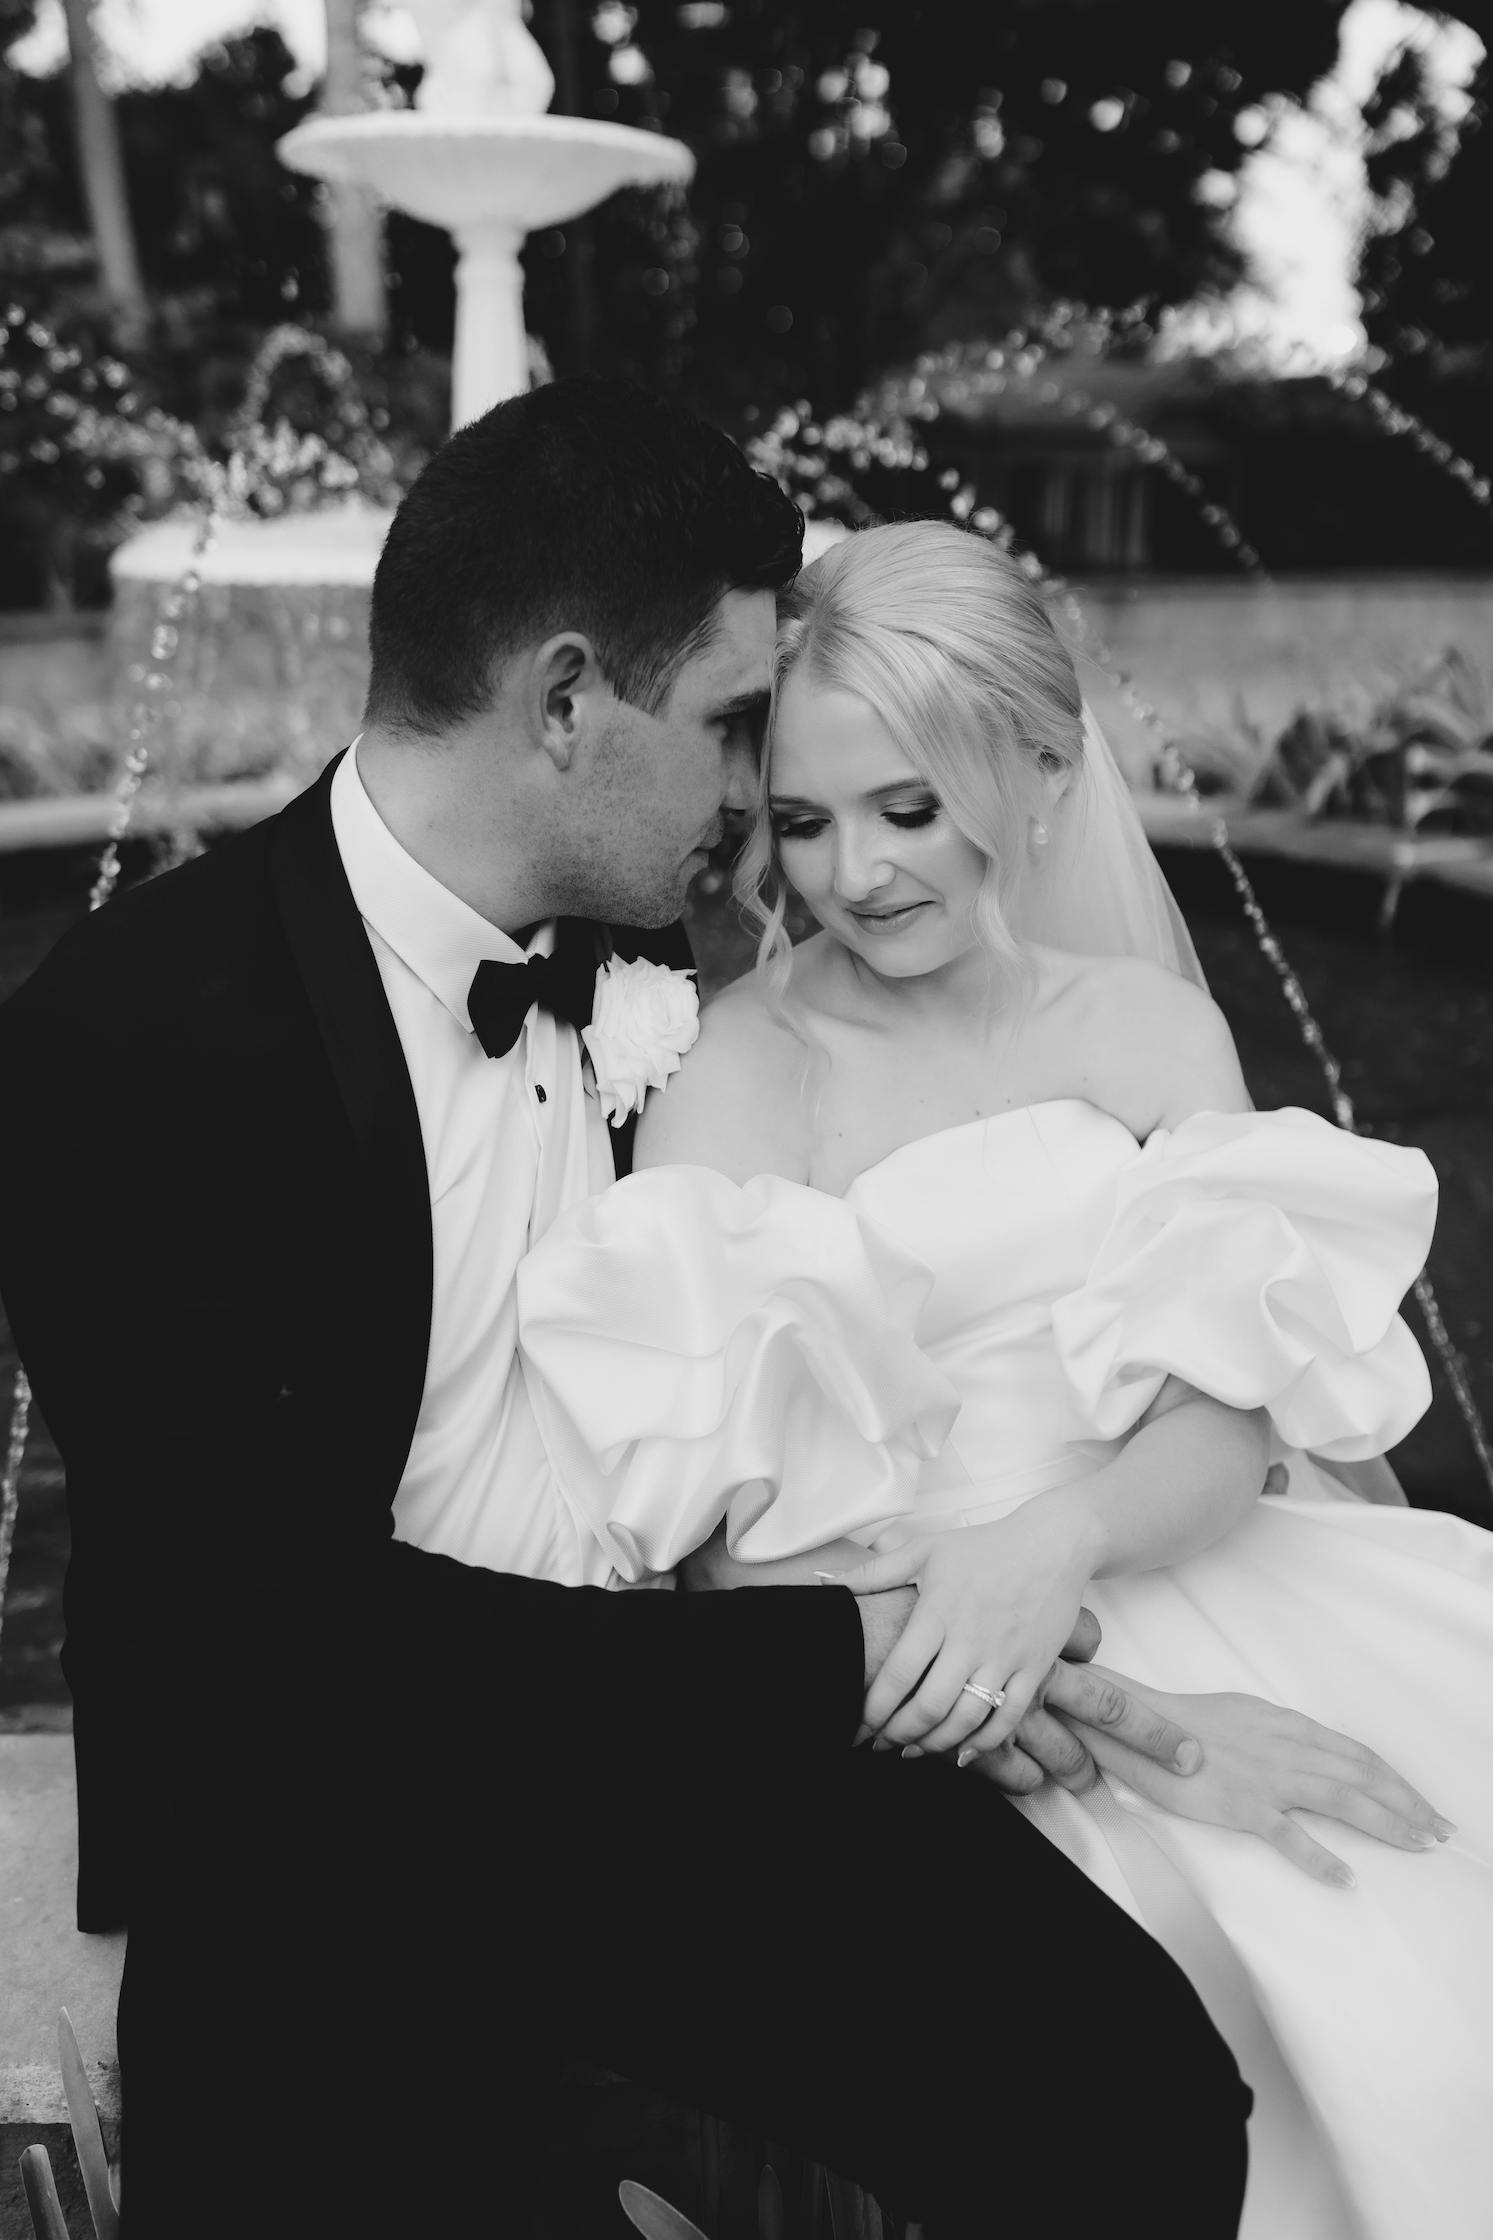 Black and white photo of a newlywed couple seated closely on a bench. The groom, in a suit, leans his forehead against the bride's head. The bride, in an off-shoulder wedding dress, smiles gently. A water fountain is visible in the background.